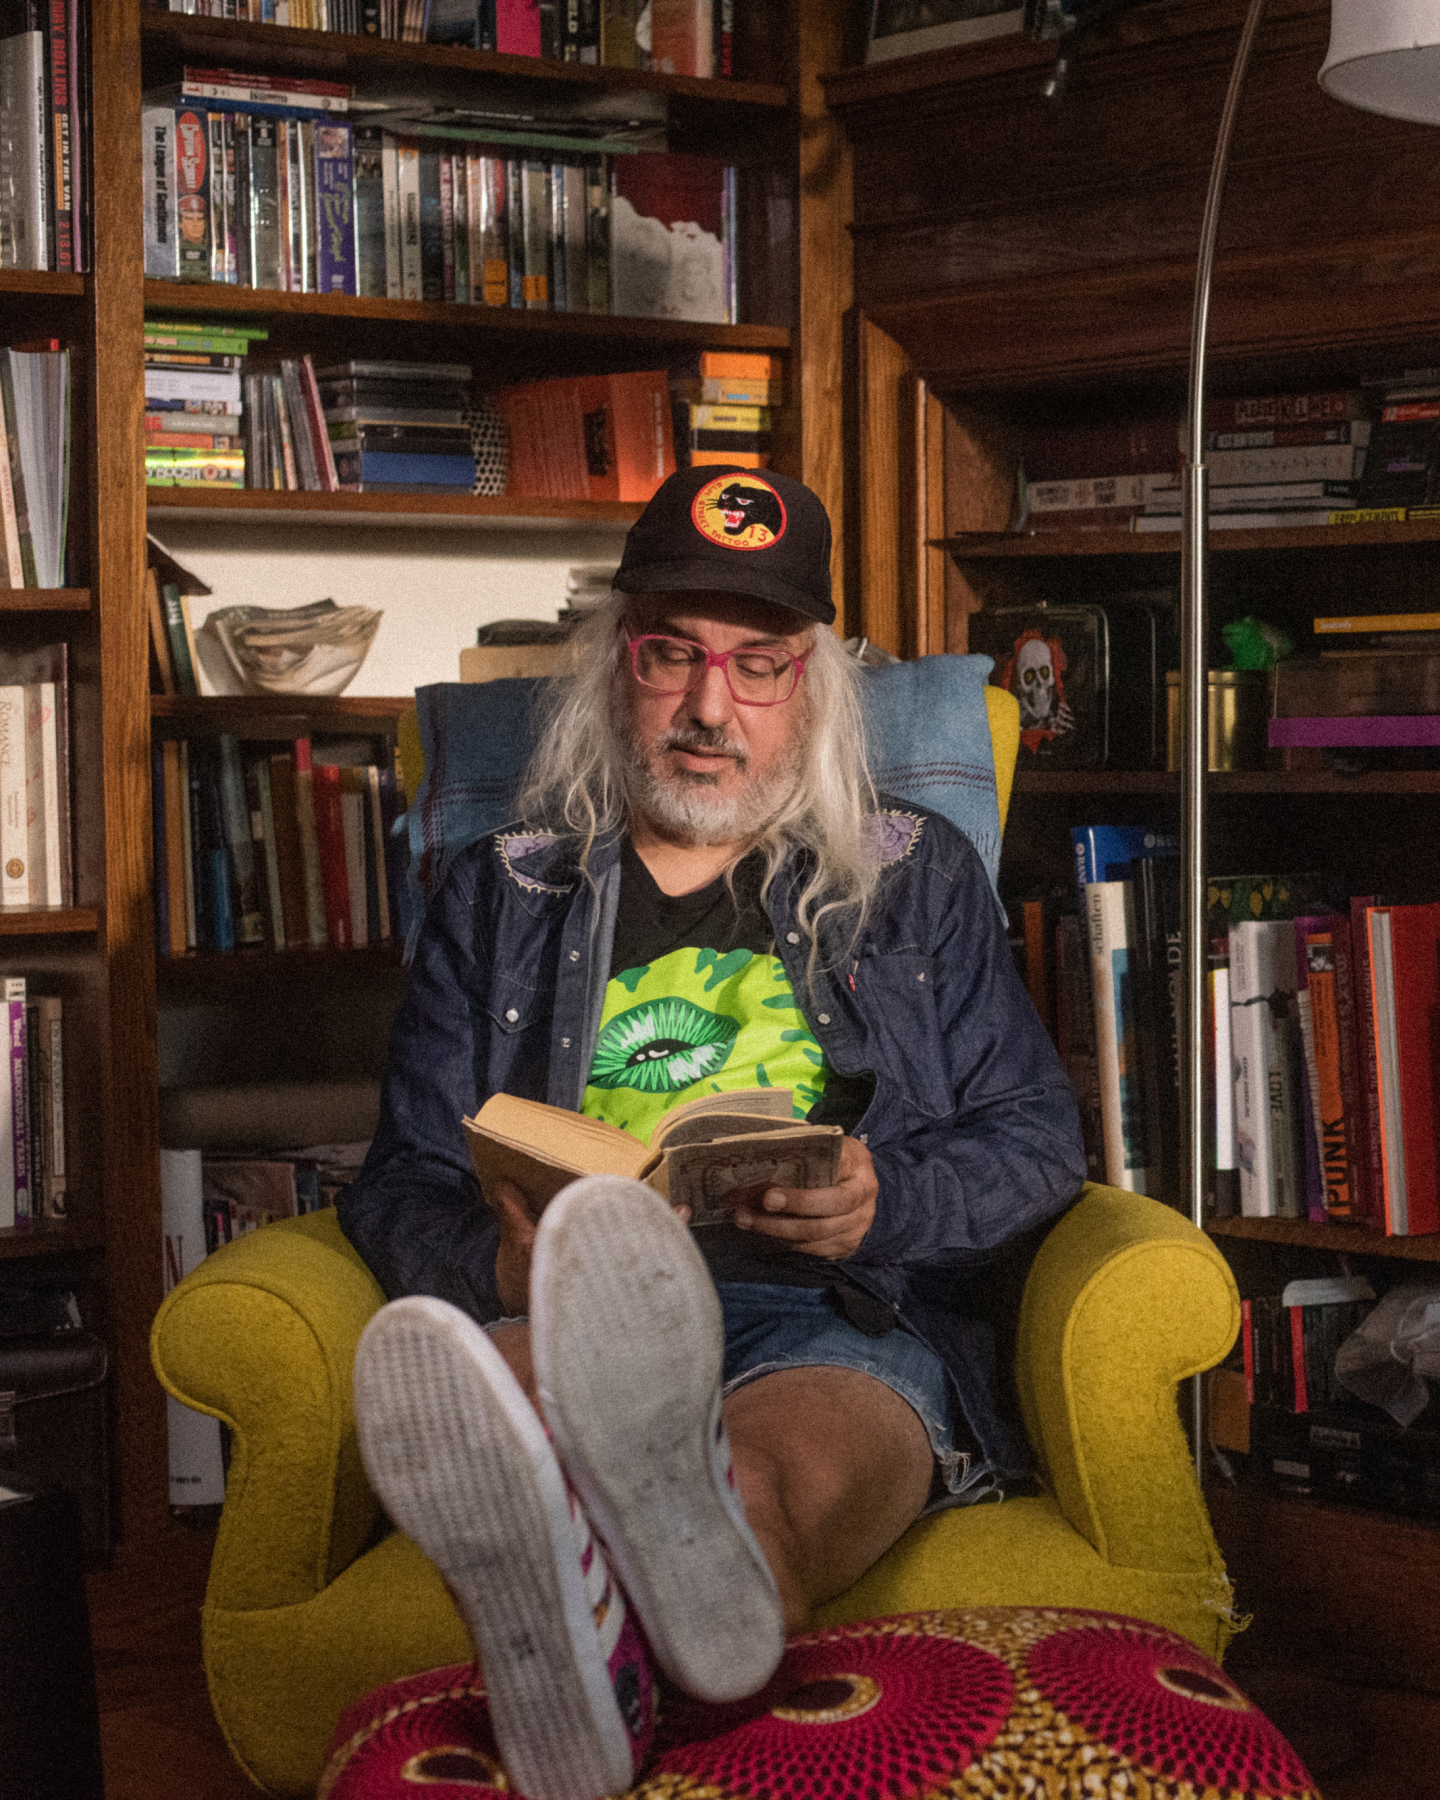 Image of J Mascis sitting in an armchair and reading